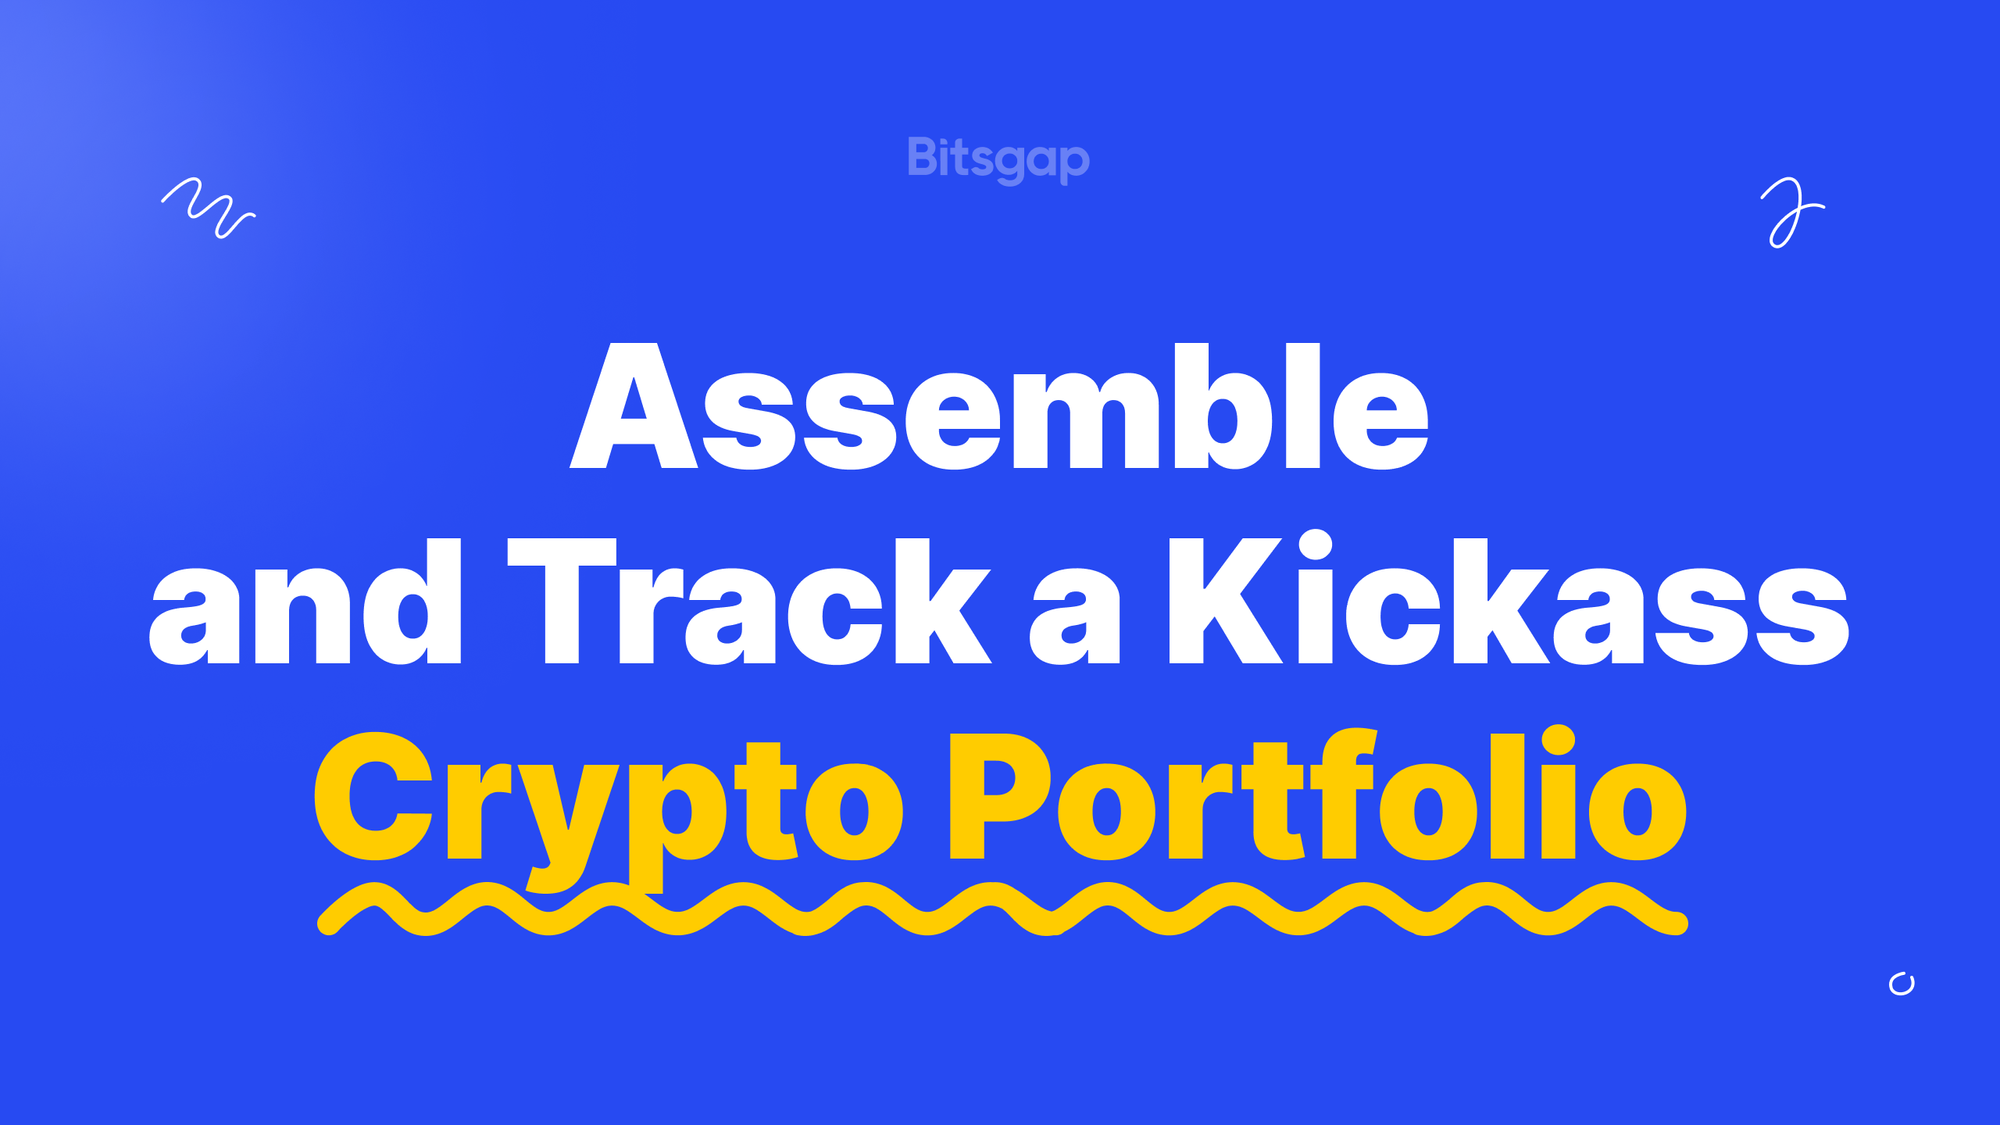 How to Build and Monitor a Portfolio of Cryptocurrency Assets